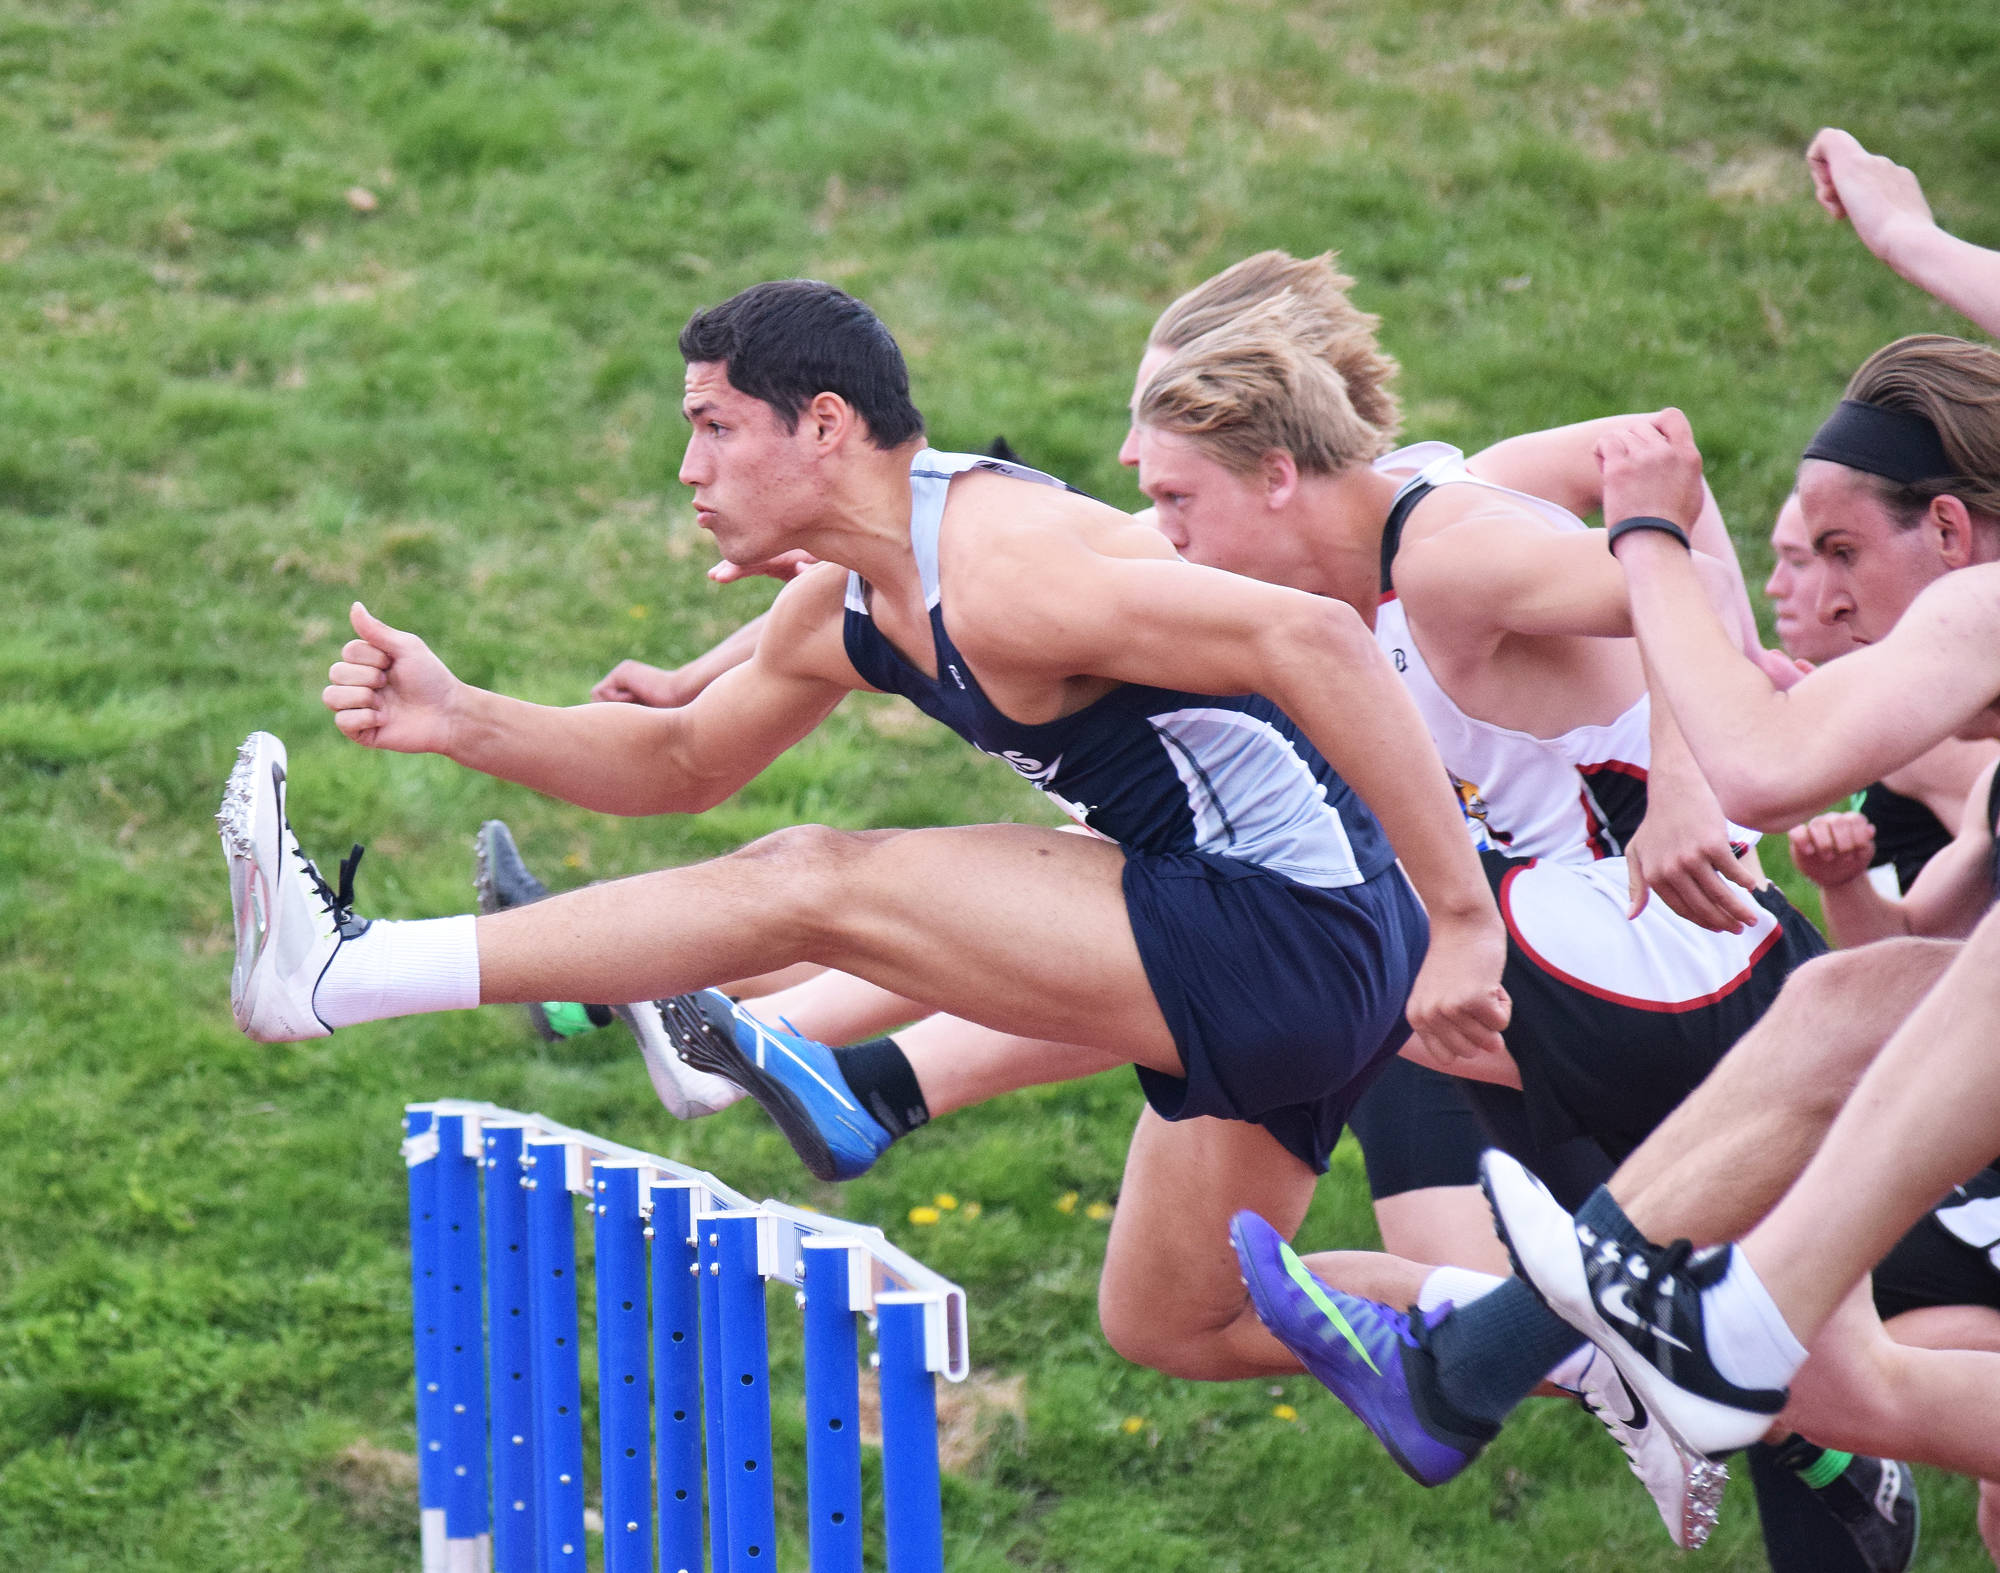 Soldotna senior Abraham Van Hout leads the field over the first barrier in the boys 110-meter hurdles final May 20 at the Region III track & field championships in Homer. (Photo by Joey Klecka/Peninsula Clarion)